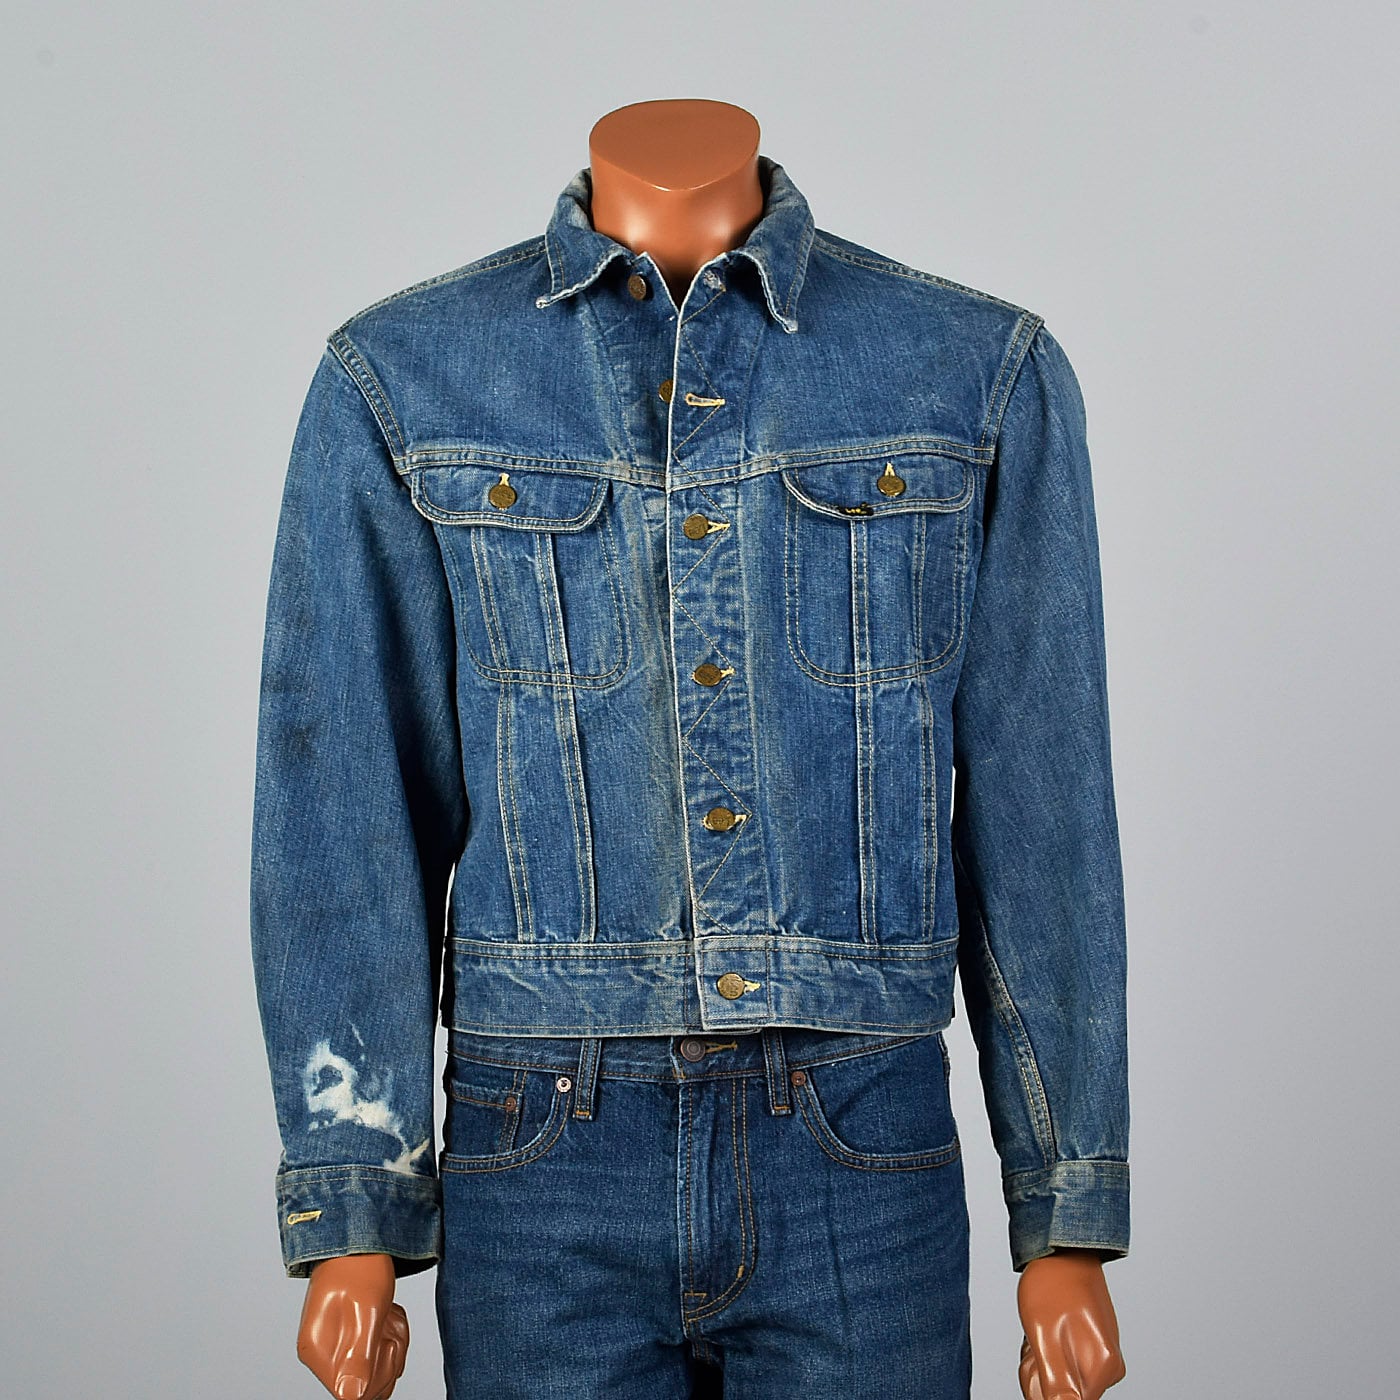 Vintage Lee Jeans 101-J Riders Jacket From The1950s - Long John